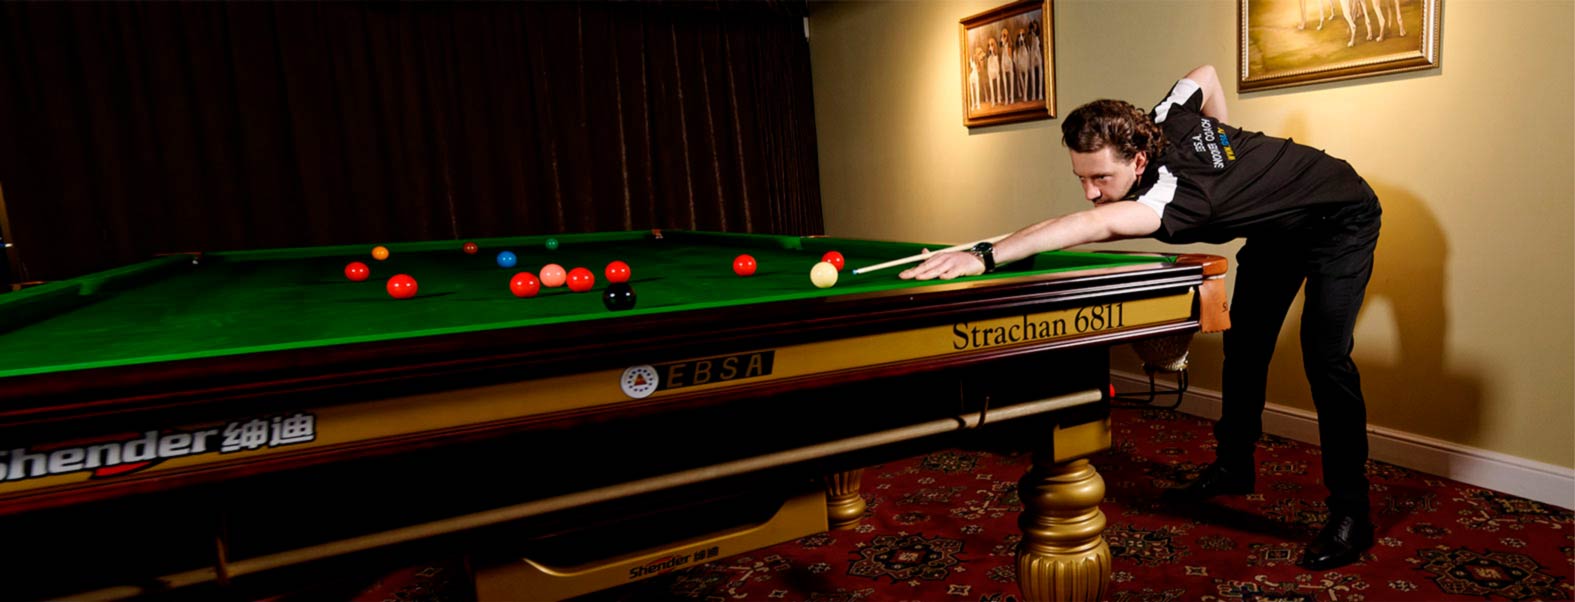 Snooker Coach Brando Let me take your snooker skills to the next level!